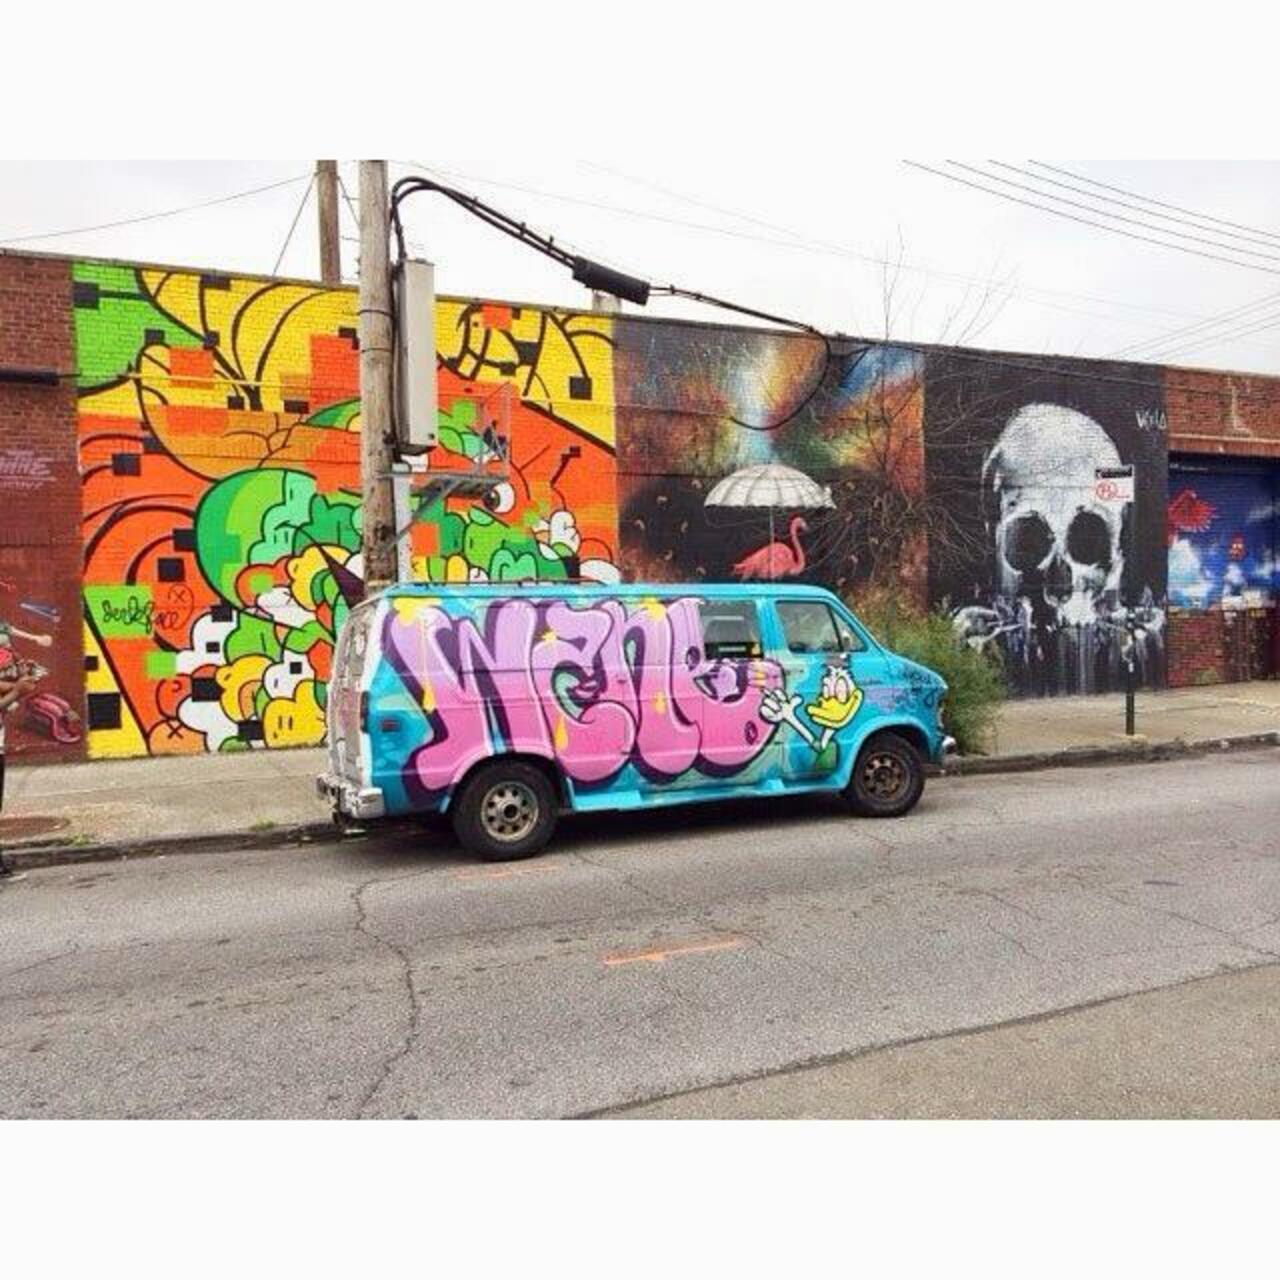 I saw this van in #brooklyn . Does anyone know of the #artist ? #streetart #graffiti http://t.co/AbkioC3SnH